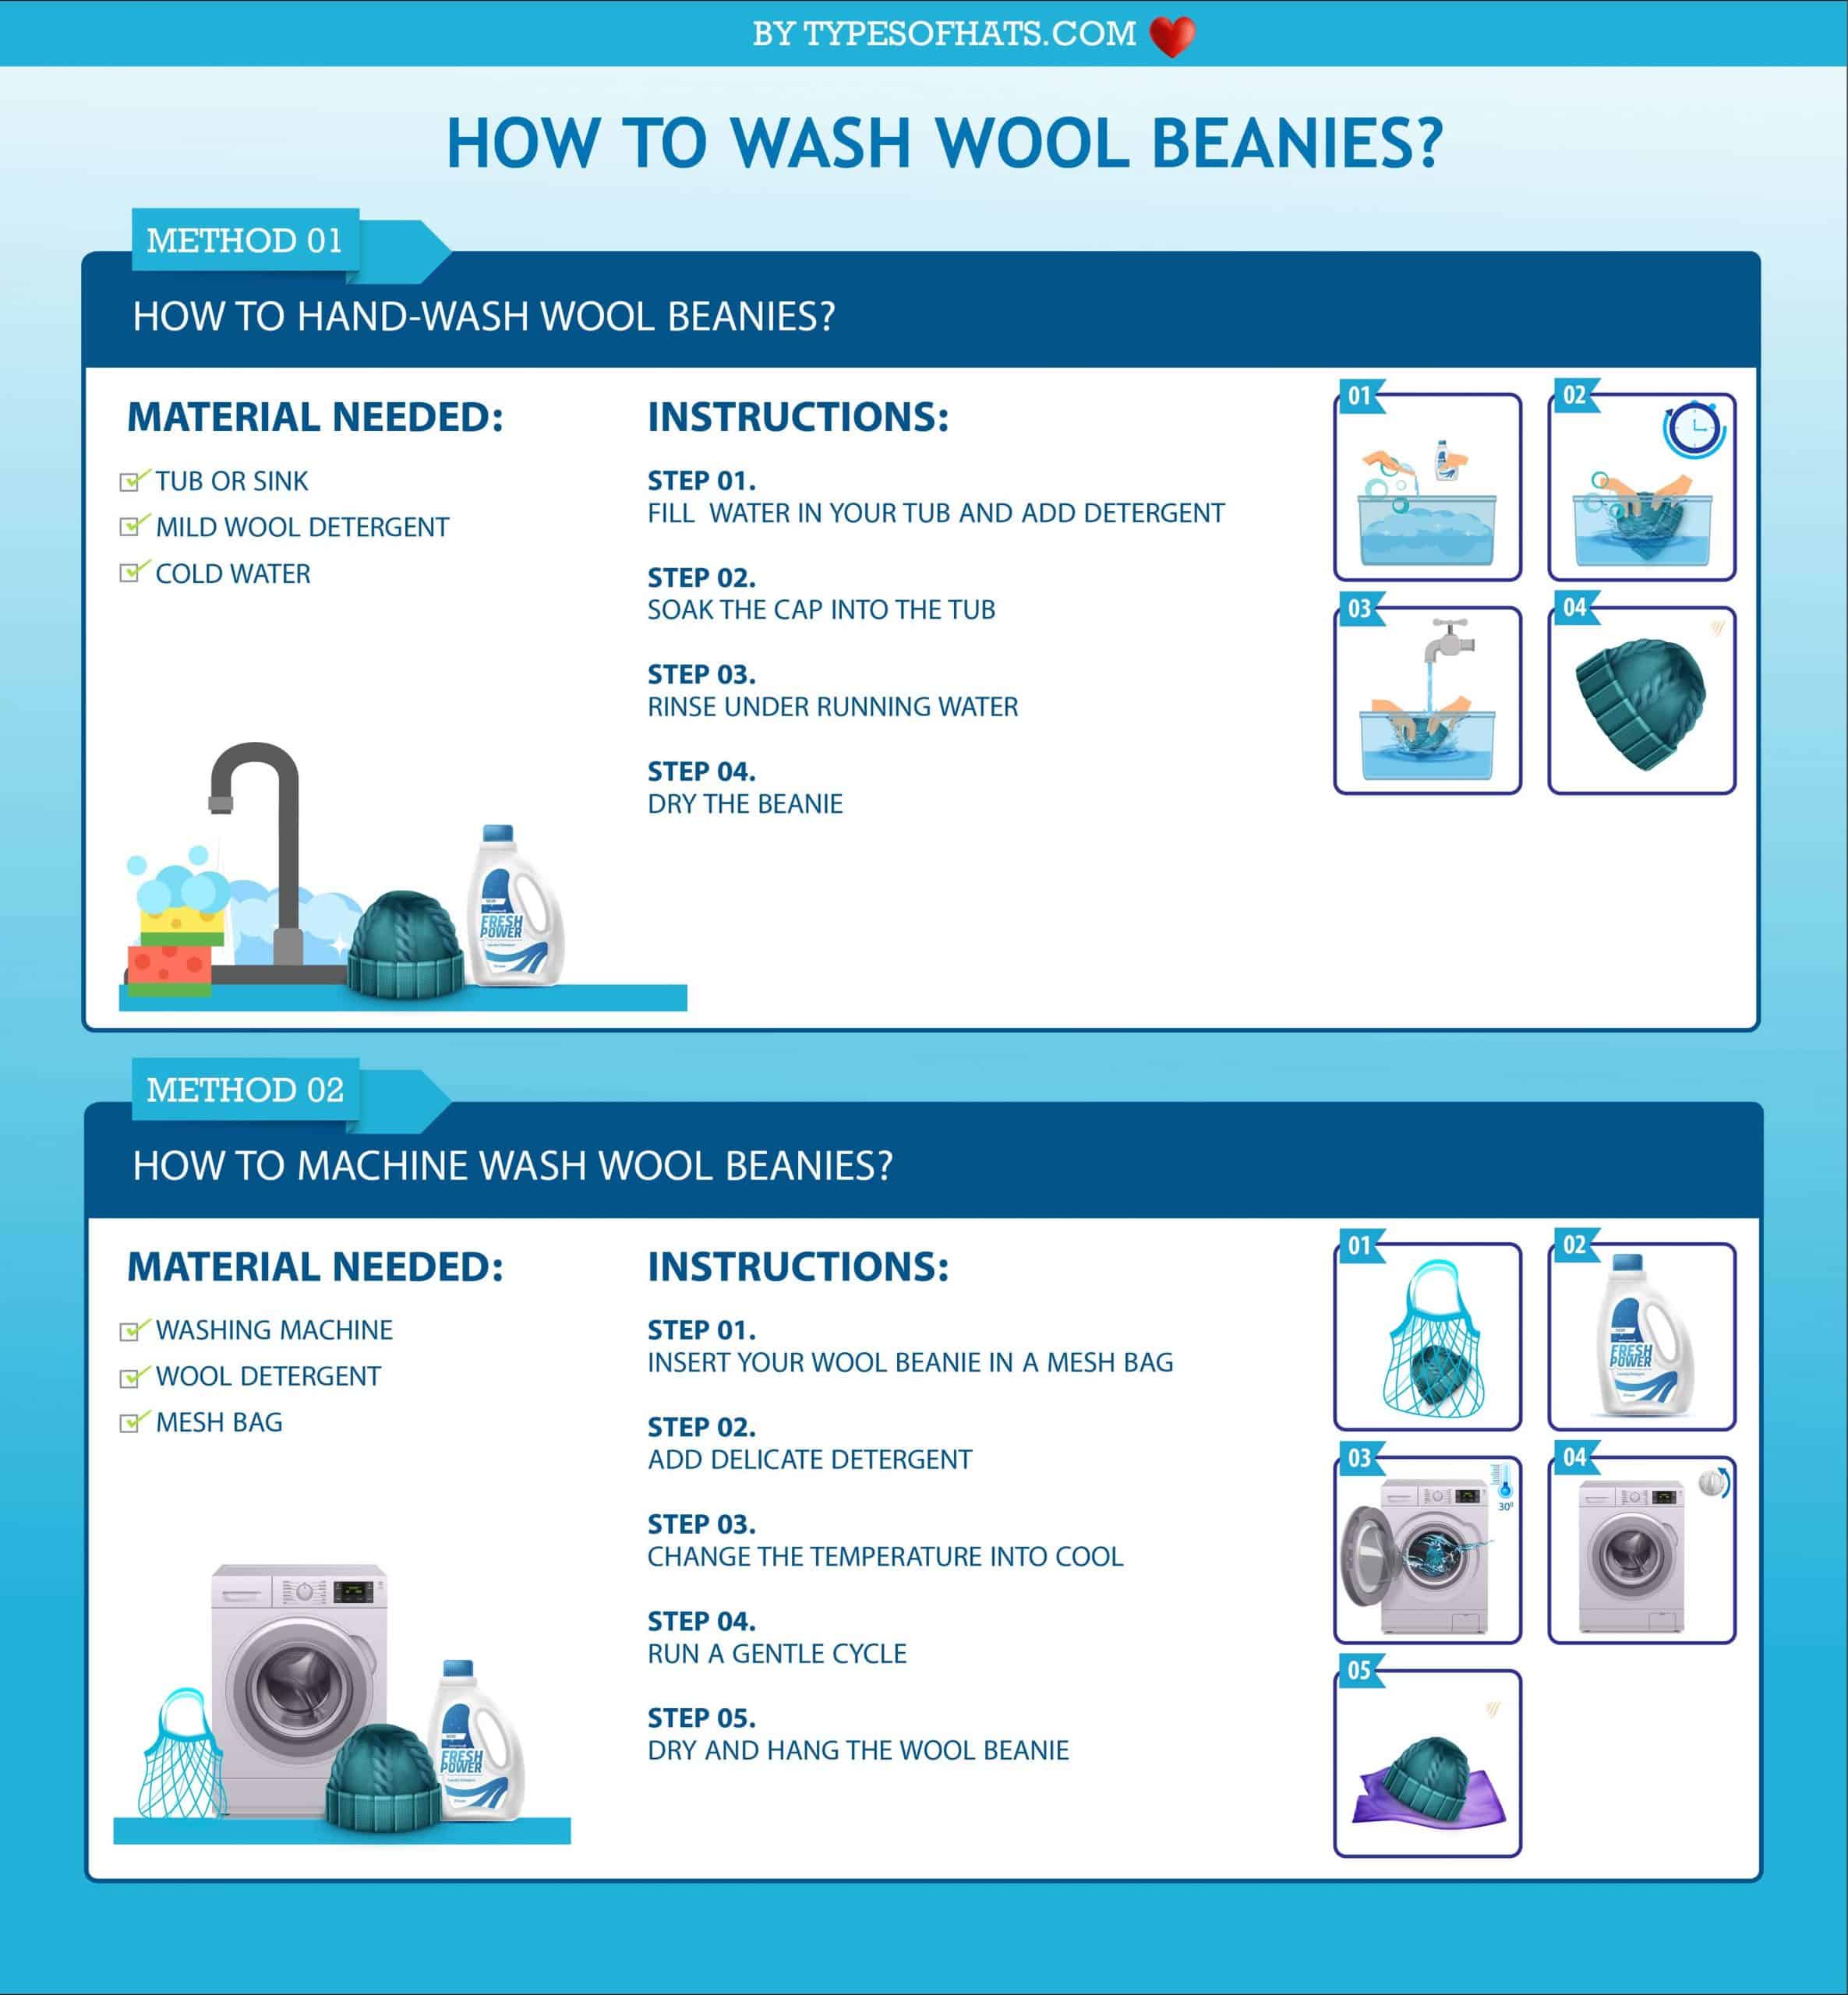 How to wash wool beanies-01